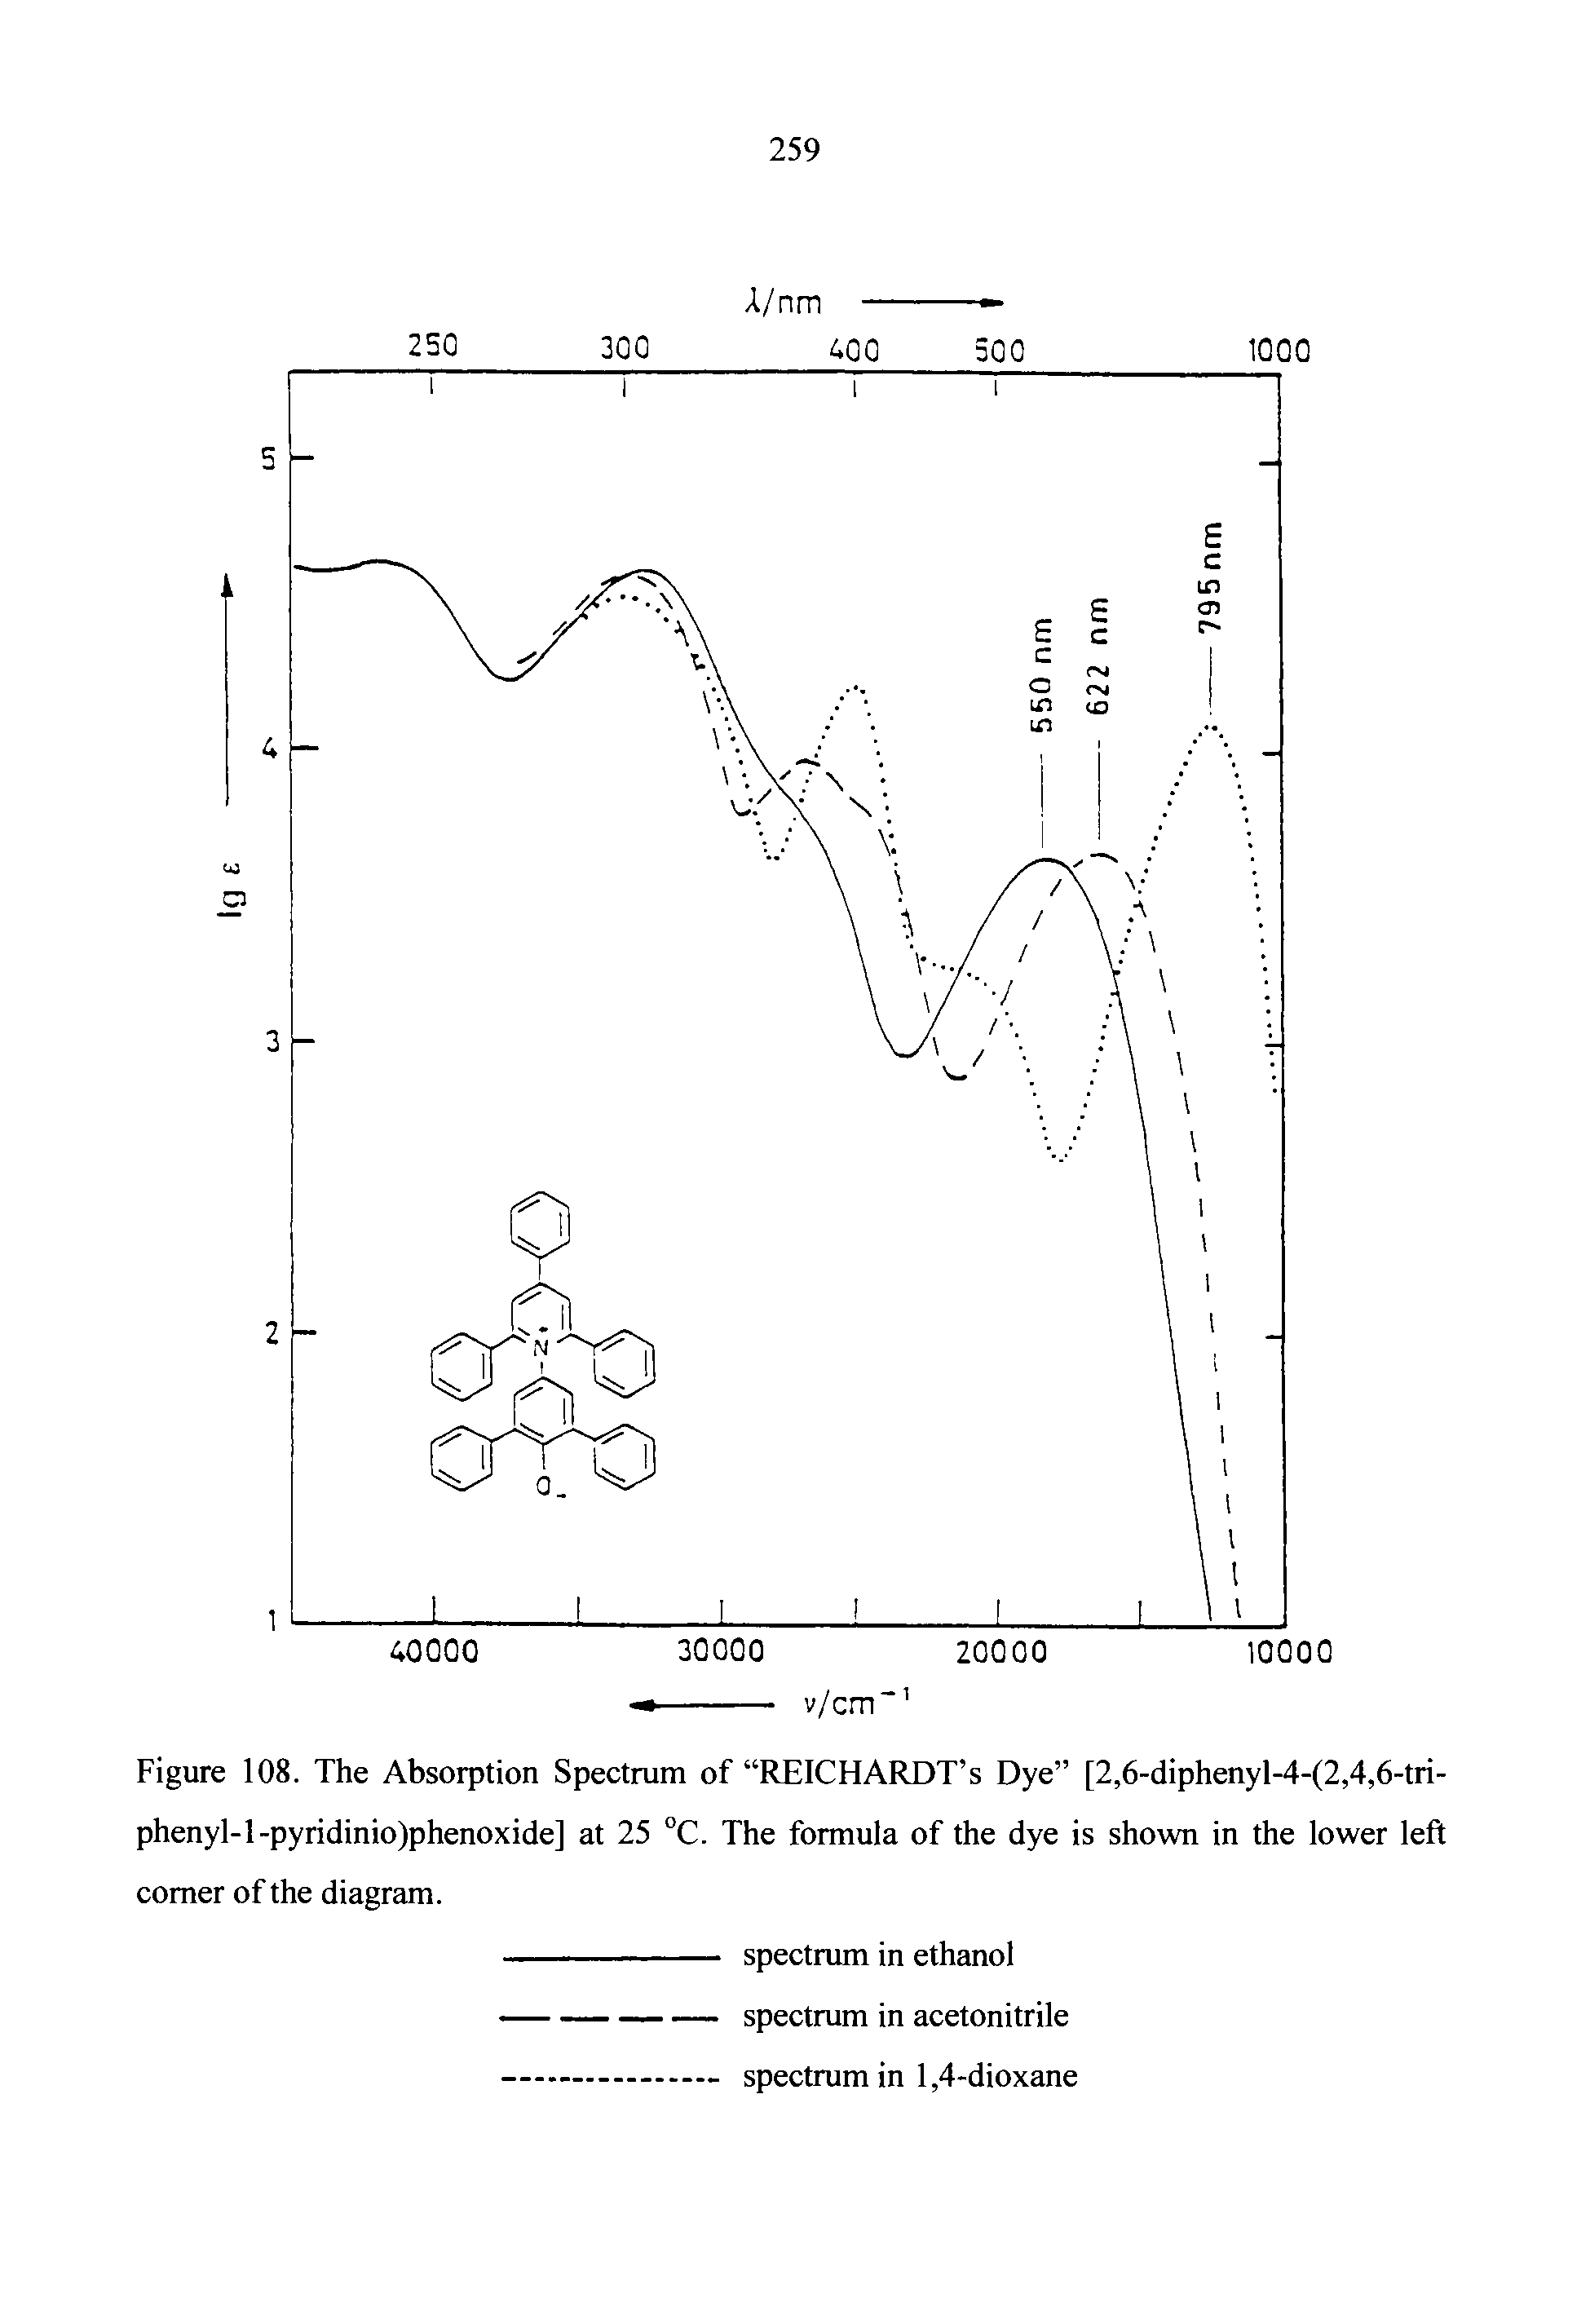 Figure 108. The Absorption Spectrum of REICHARDT s Dye [2,6-diphenyl-4-(2,4,6-tri-phenyl-l-pyridinio)phenoxide] at 25 °C. The formula of the dye is shown in the lower left comer of the diagram.